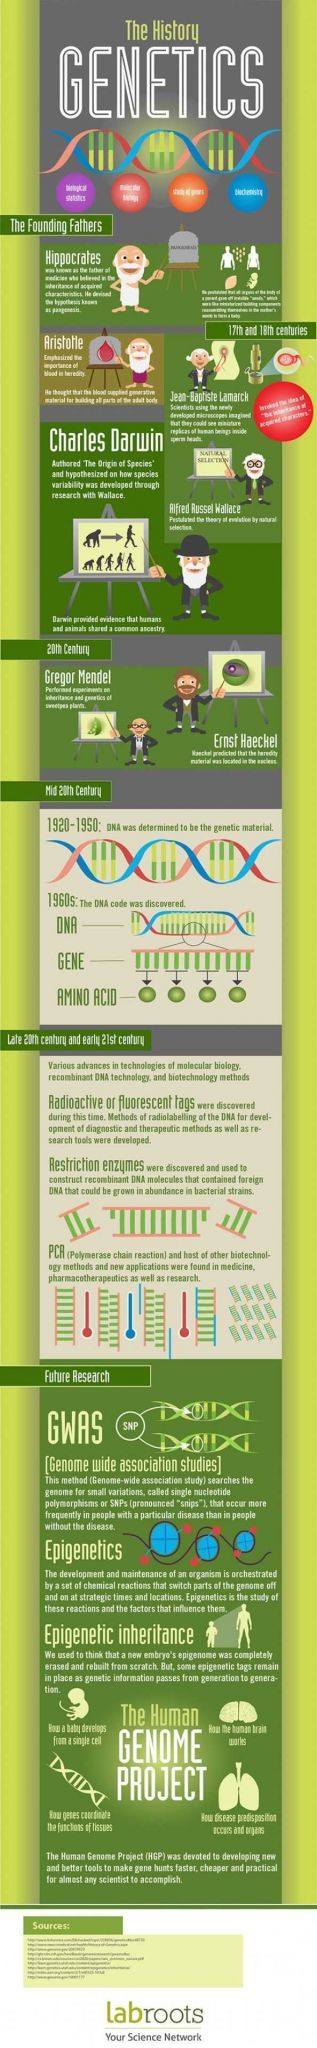 Cracking Your Genetic Code Worksheet as Well as 183 Best Genetics Images On Pinterest